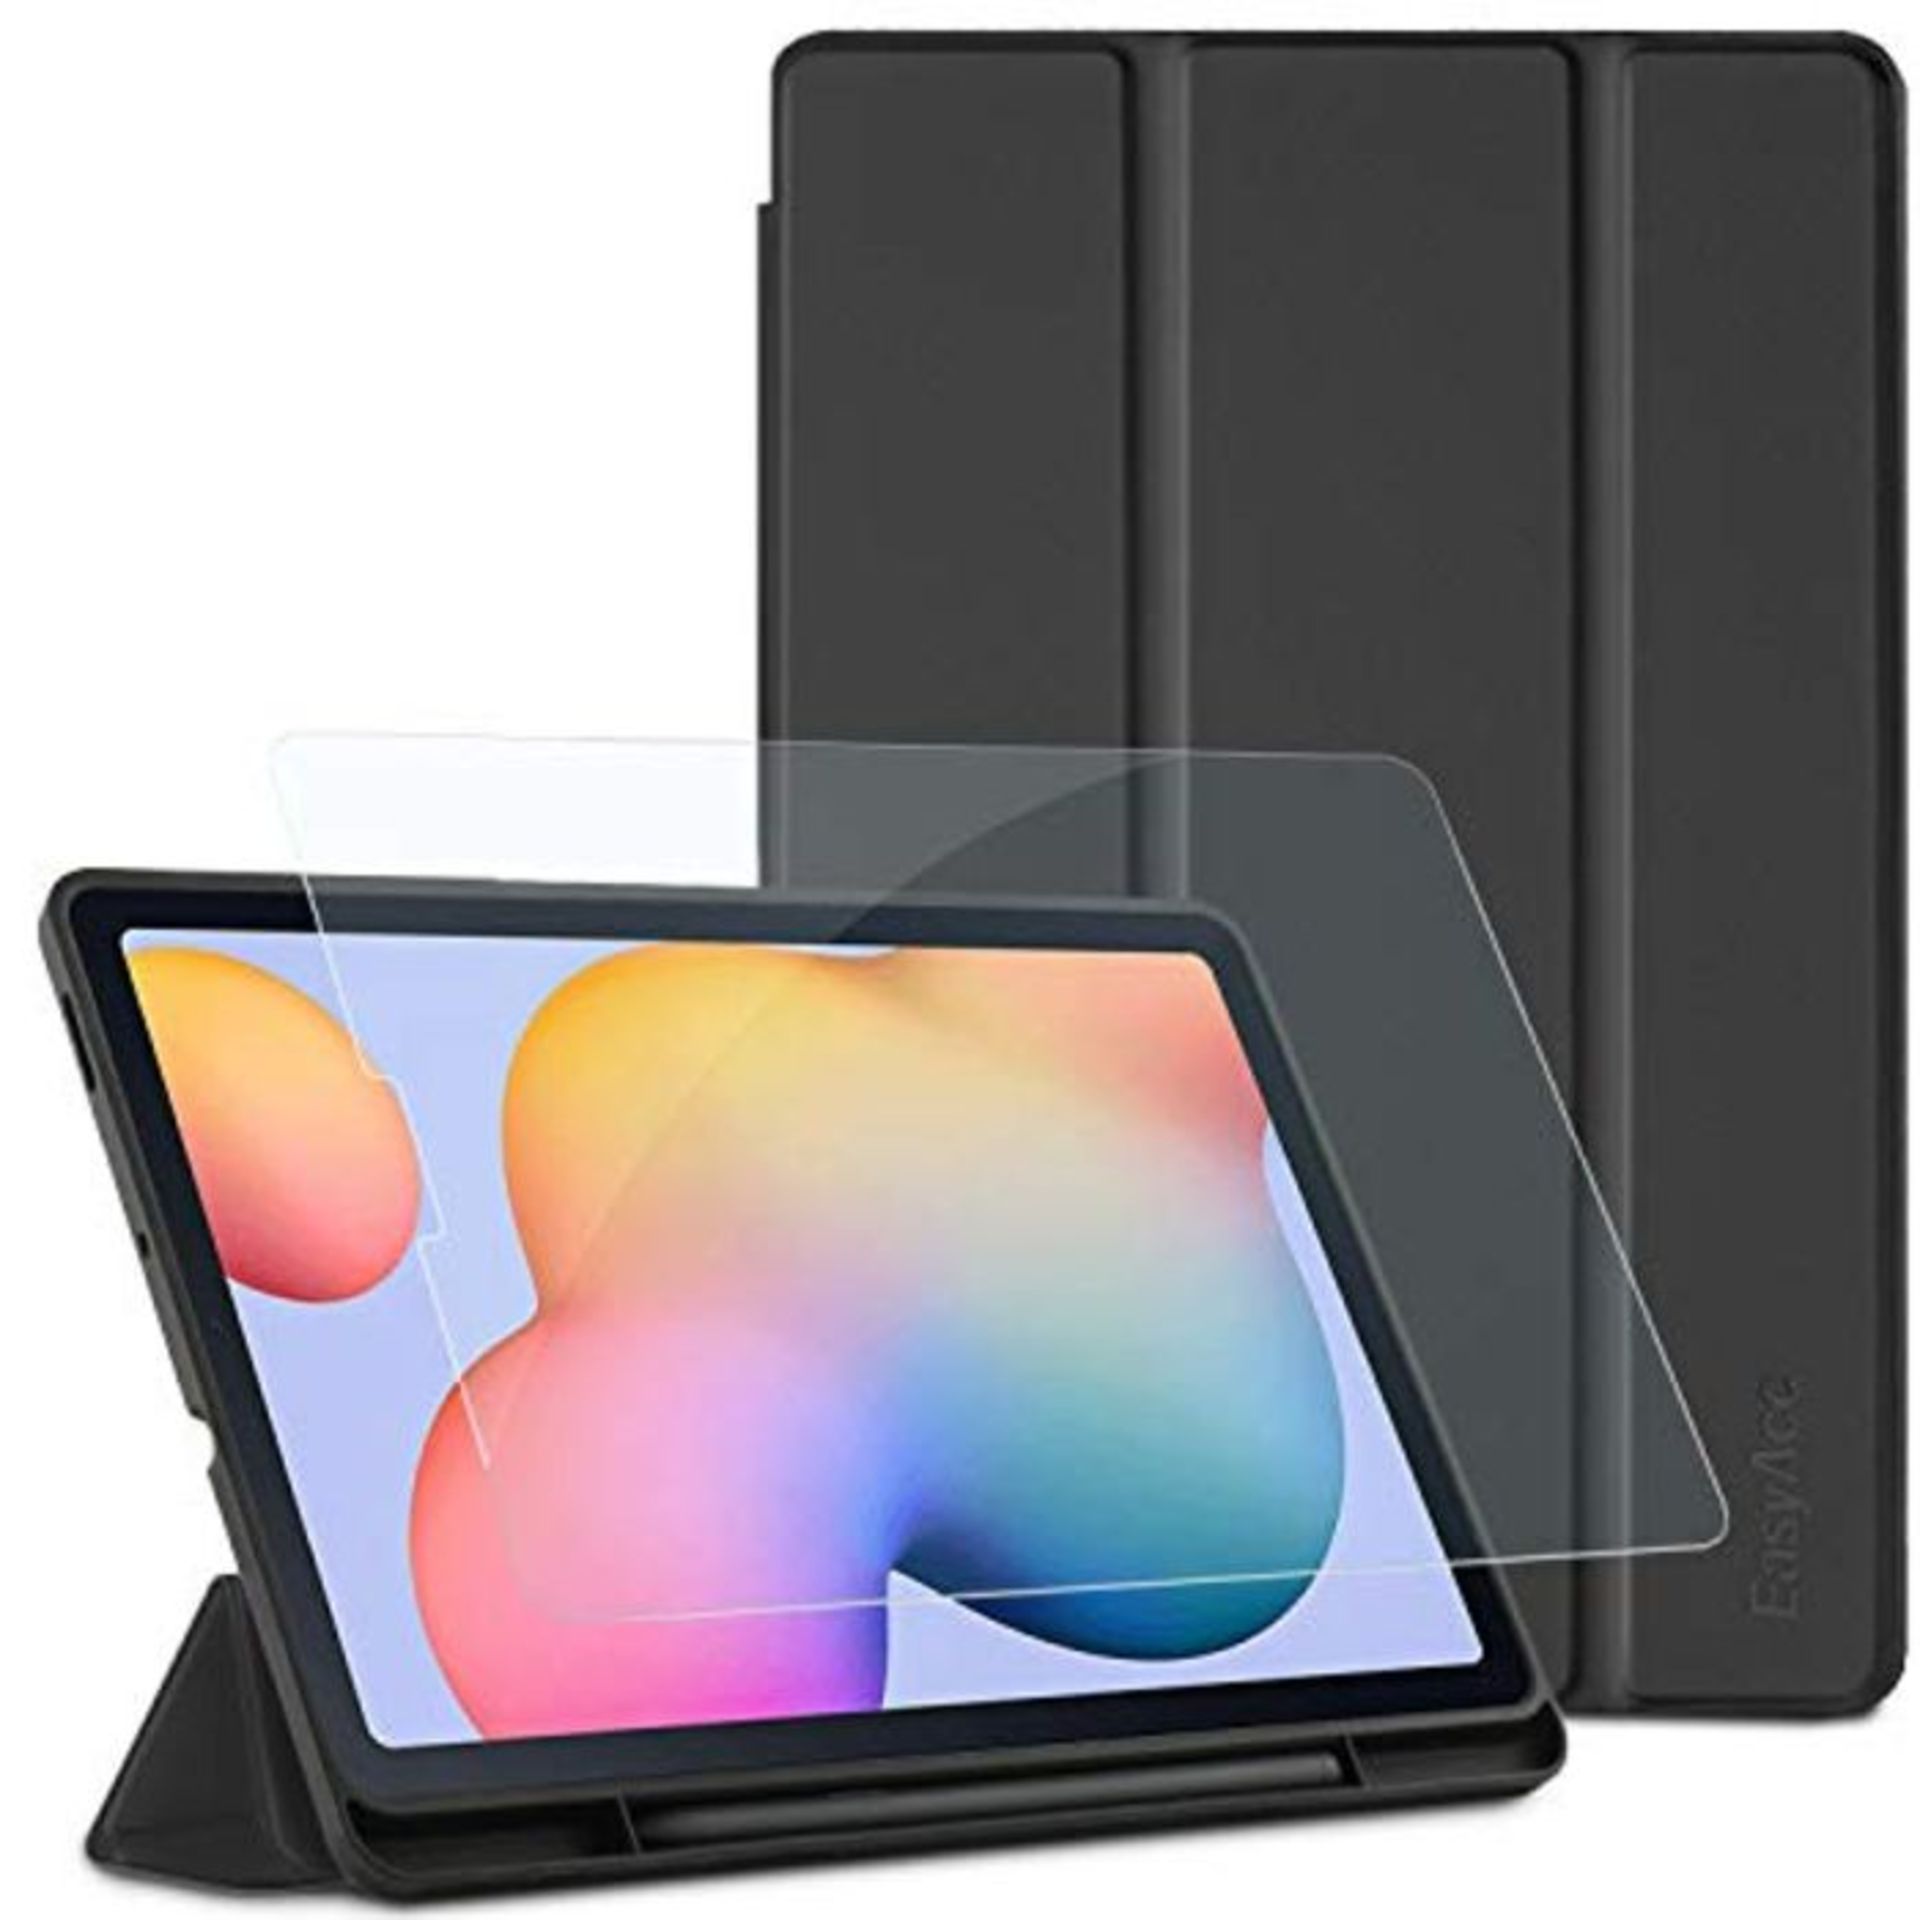 EasyAcc for Samsung Galaxy Tab S6 Lite 2020 case - Ultra thin with stand function Slim